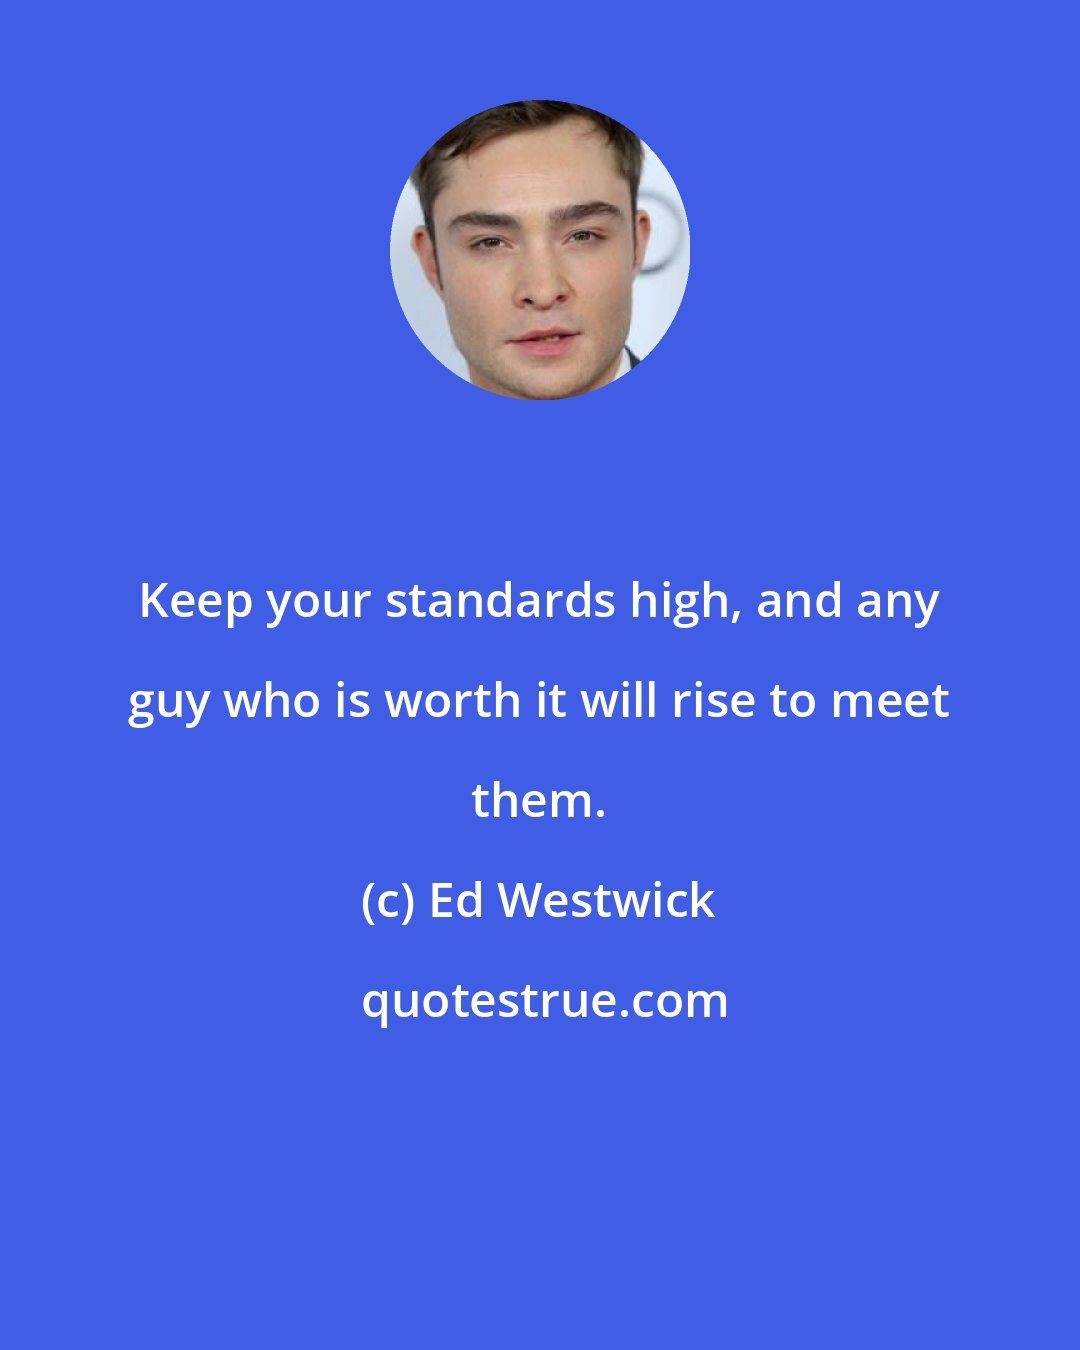 Ed Westwick: Keep your standards high, and any guy who is worth it will rise to meet them.